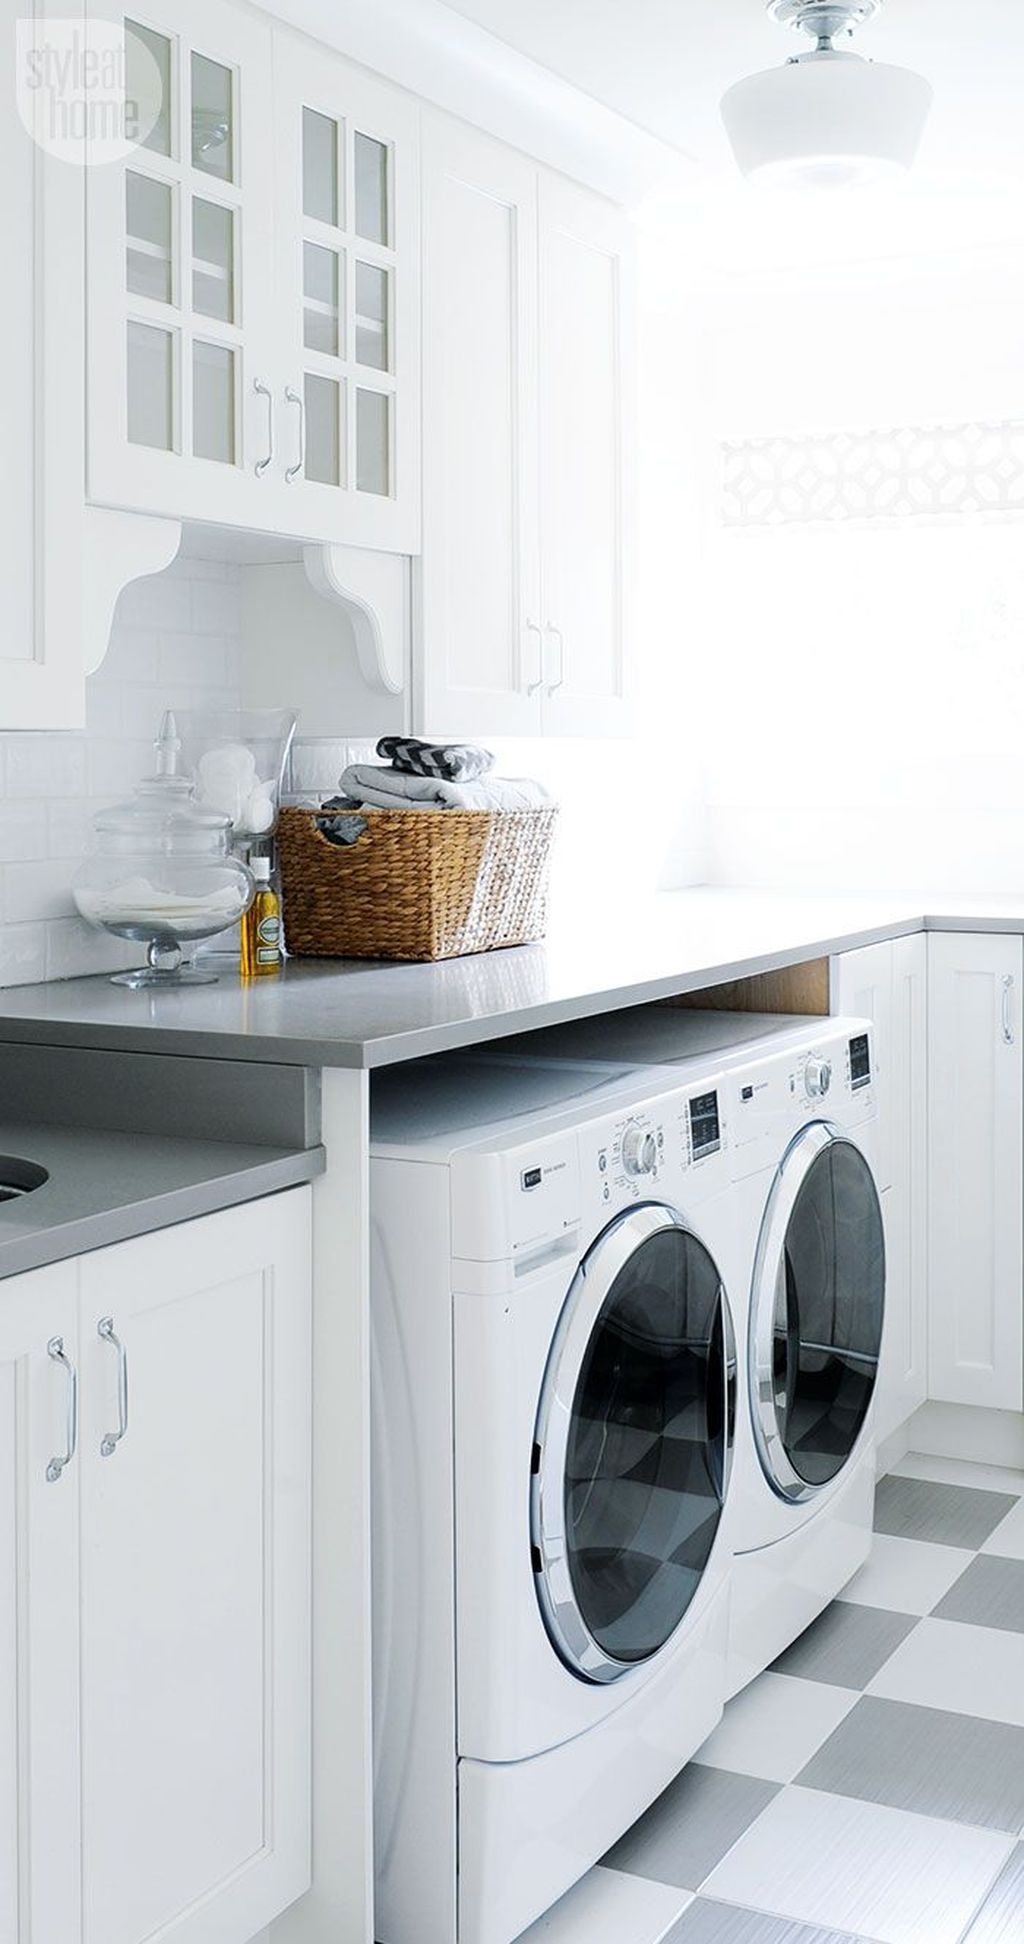 Inspiring Laundry Room Design With French Country Style 26